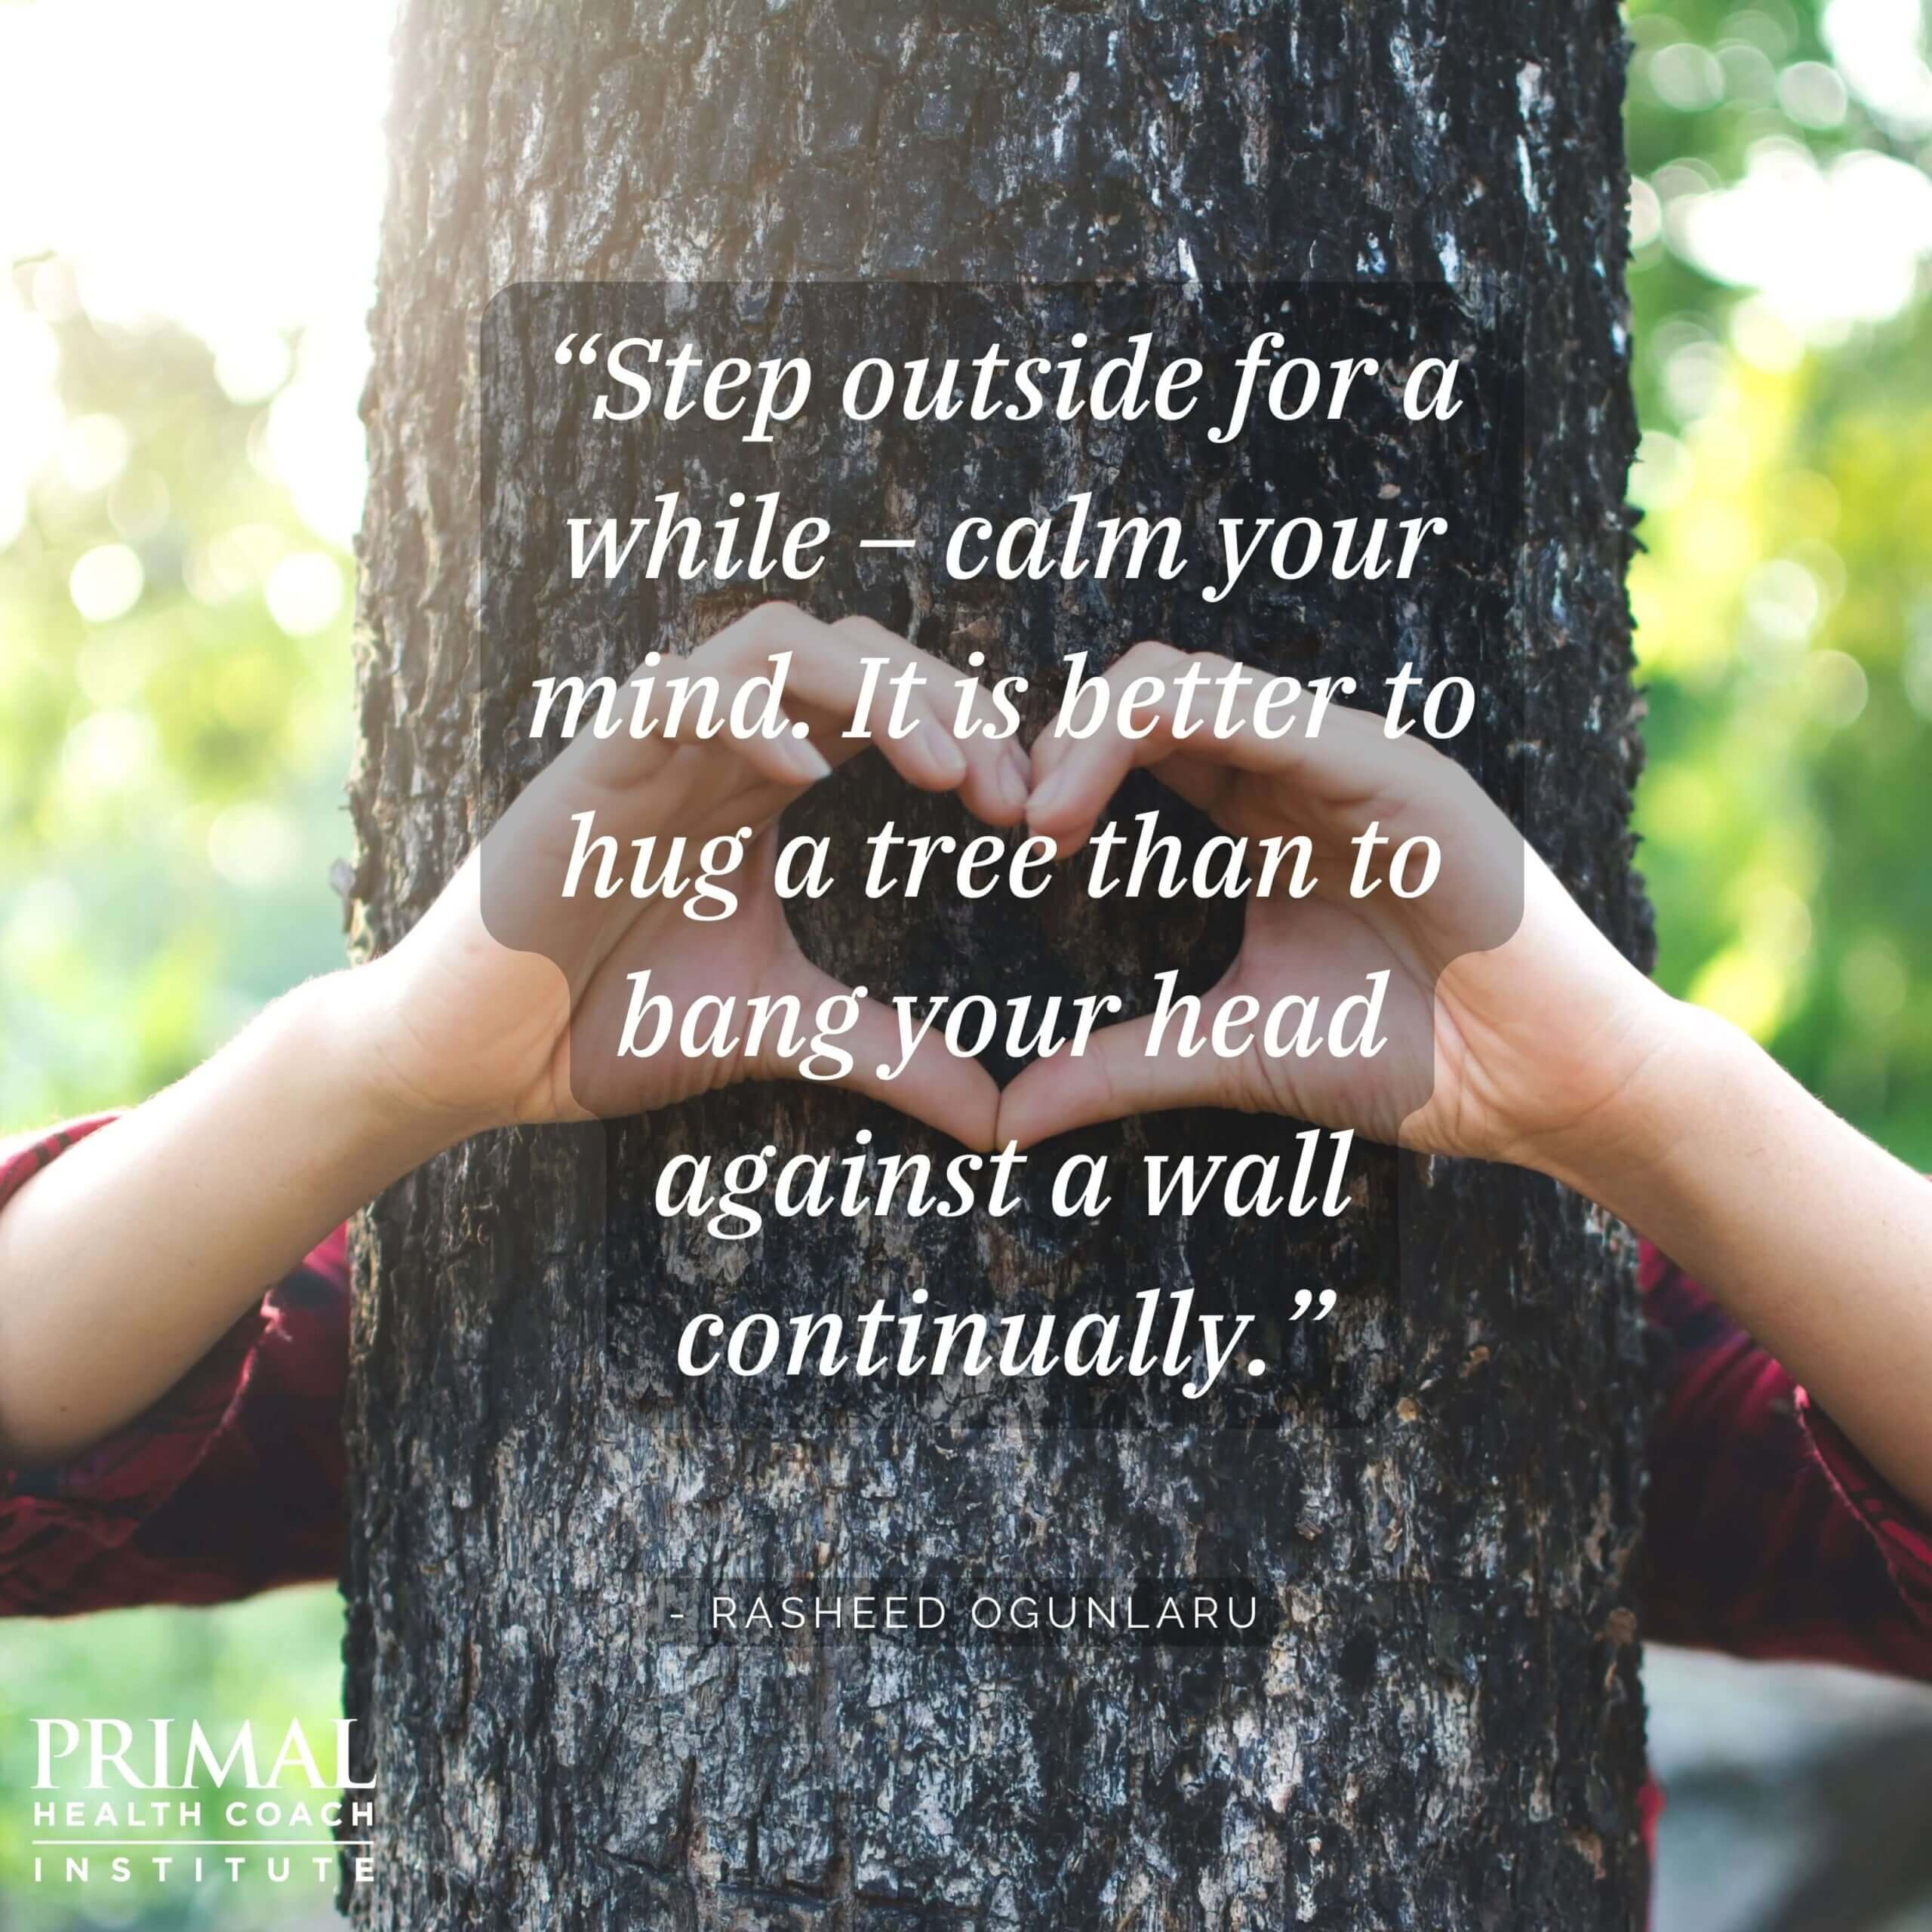 “Step outside for a while – calm your mind. It is better to hug a tree than to bang your head against a wall continually.” - Rasheed Ogunlaru